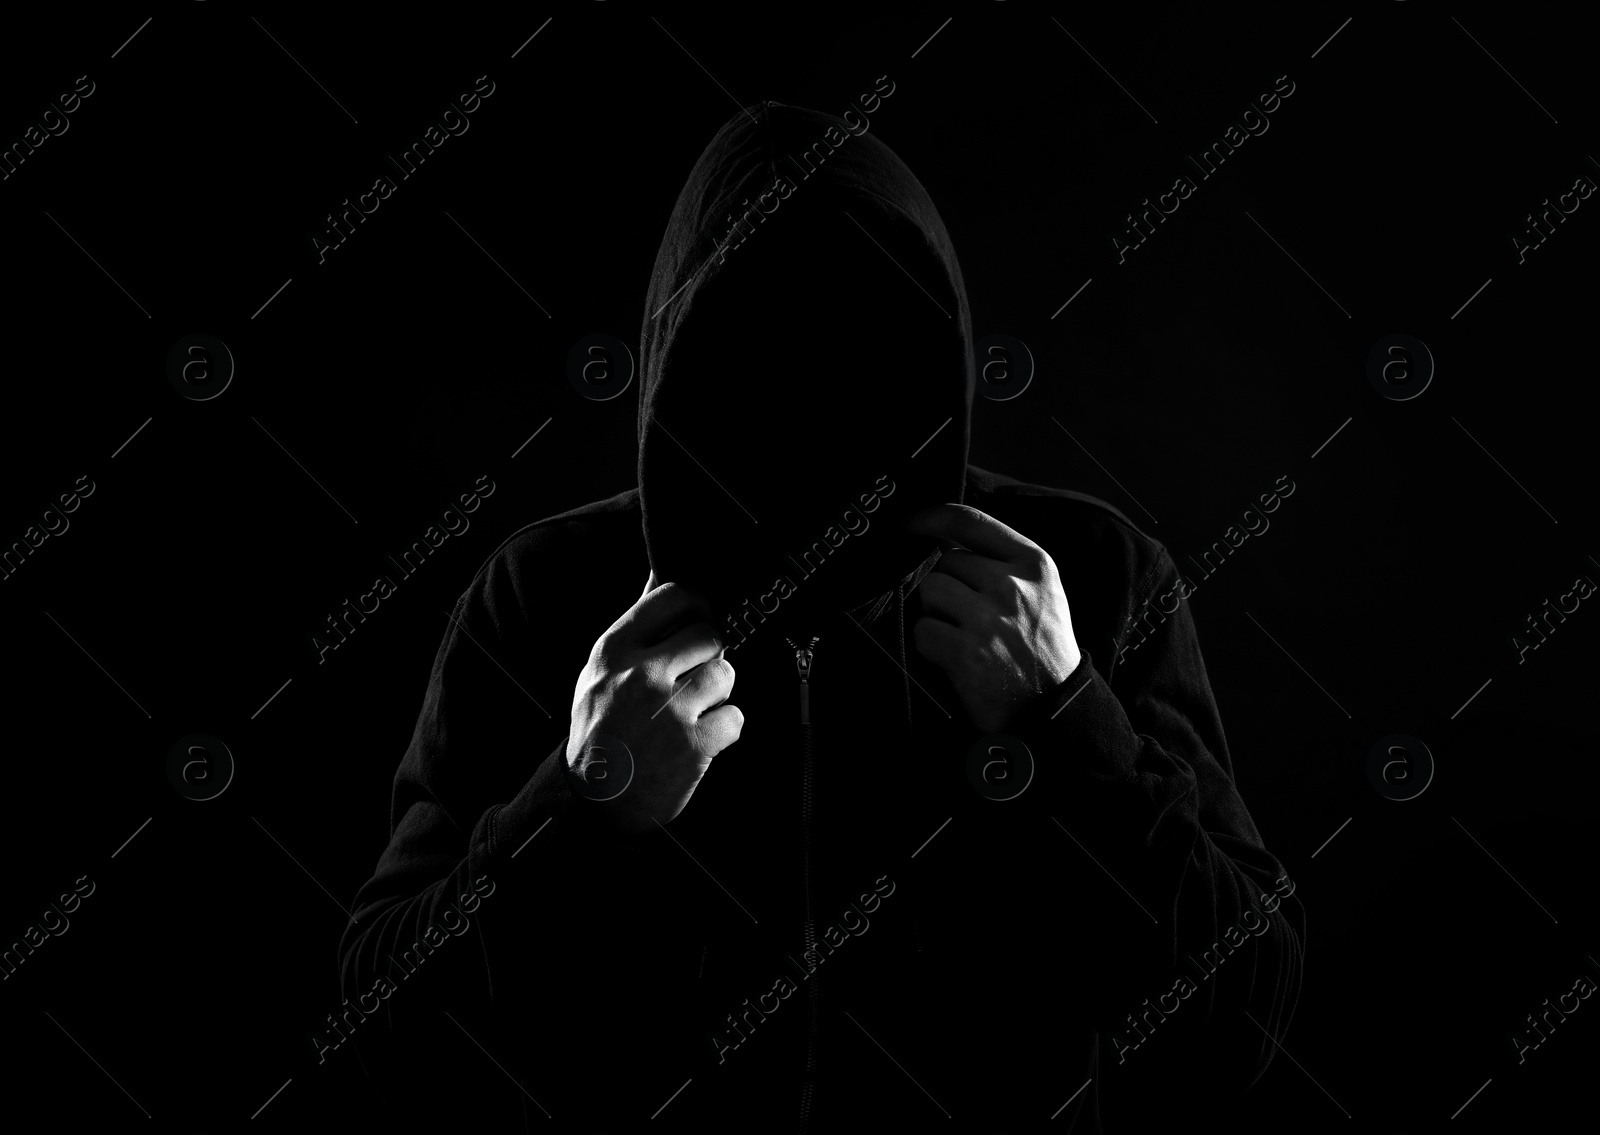 Image of Anonymous man in hood on black background